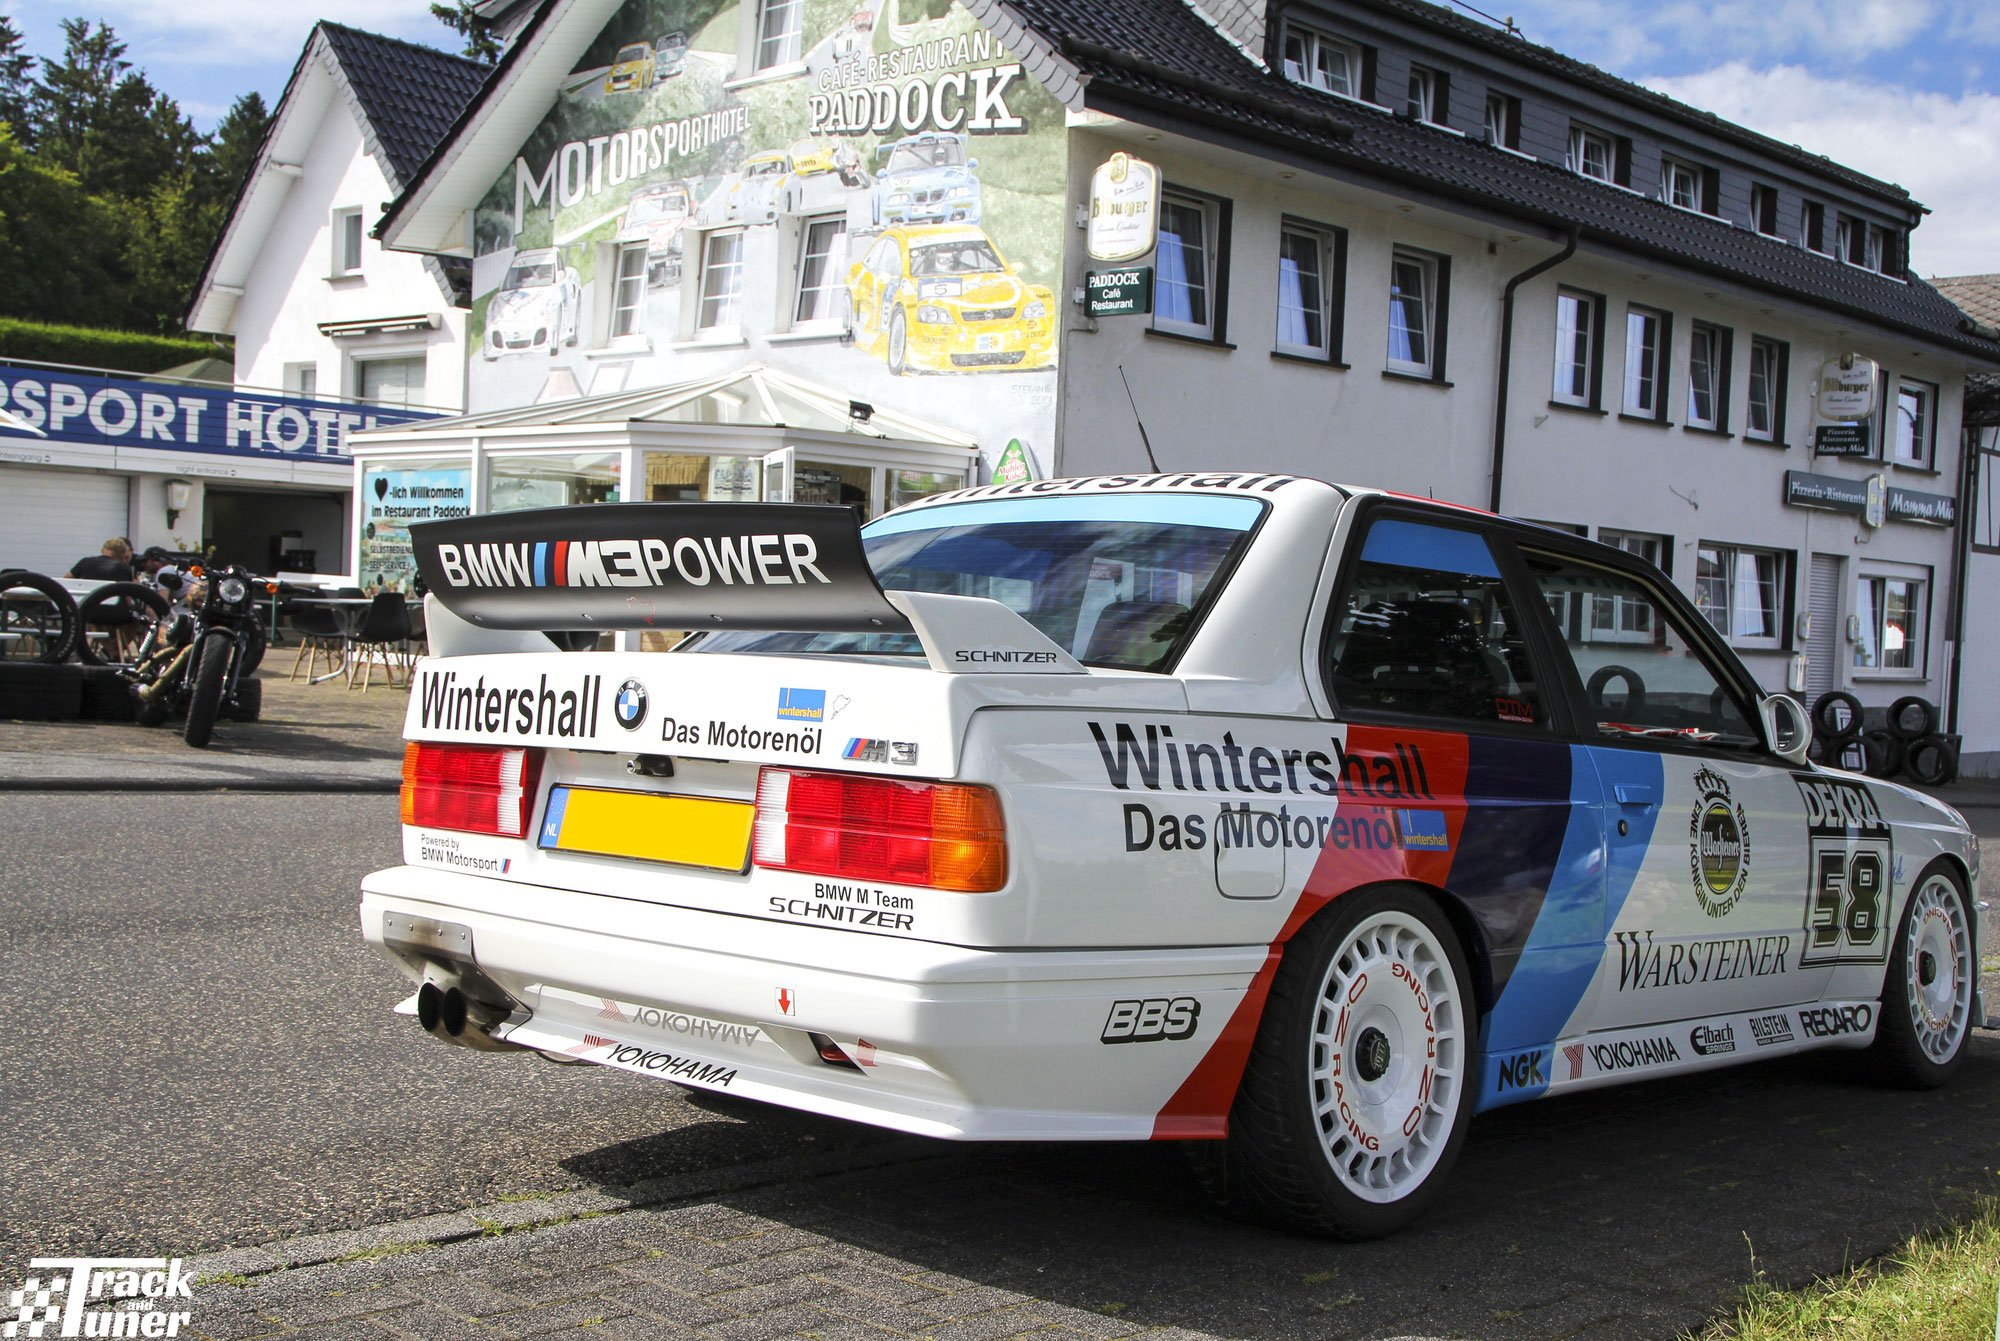 WeDRIVE: Bringing back the BMW M3 e30 DTM to the Nordschleife